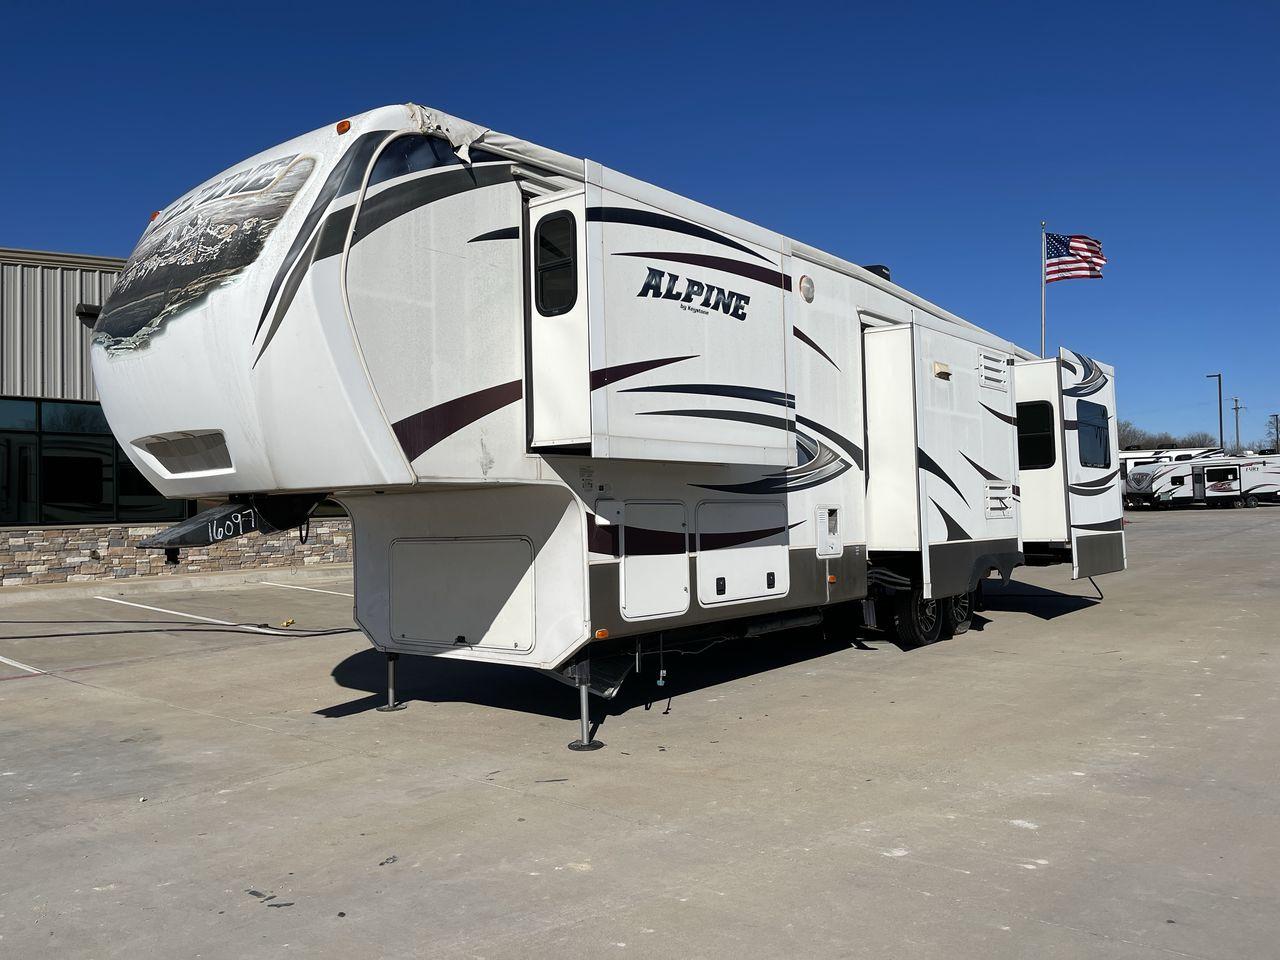 2014 WHITE ALPINE 3500RE - (4YDF35025EE) , Length: 39.17 ft. | Dry Weight: 12,379 lbs. | Gross Weight: 15,500 lbs. | Slides: 4 transmission, located at 4319 N Main Street, Cleburne, TX, 76033, (817) 221-0660, 32.435829, -97.384178 - The 2014 Alpine 3500RE fifth wheel combines style and utility. For individuals looking for a luxurious home on wheels, this RV's amenities are precisely crafted and comfort-oriented. The dimensions of this unit are 39.17 ft in length, 8 ft in width, and 12.67 ft in height. It has a dry weight of 12, - Photo #24